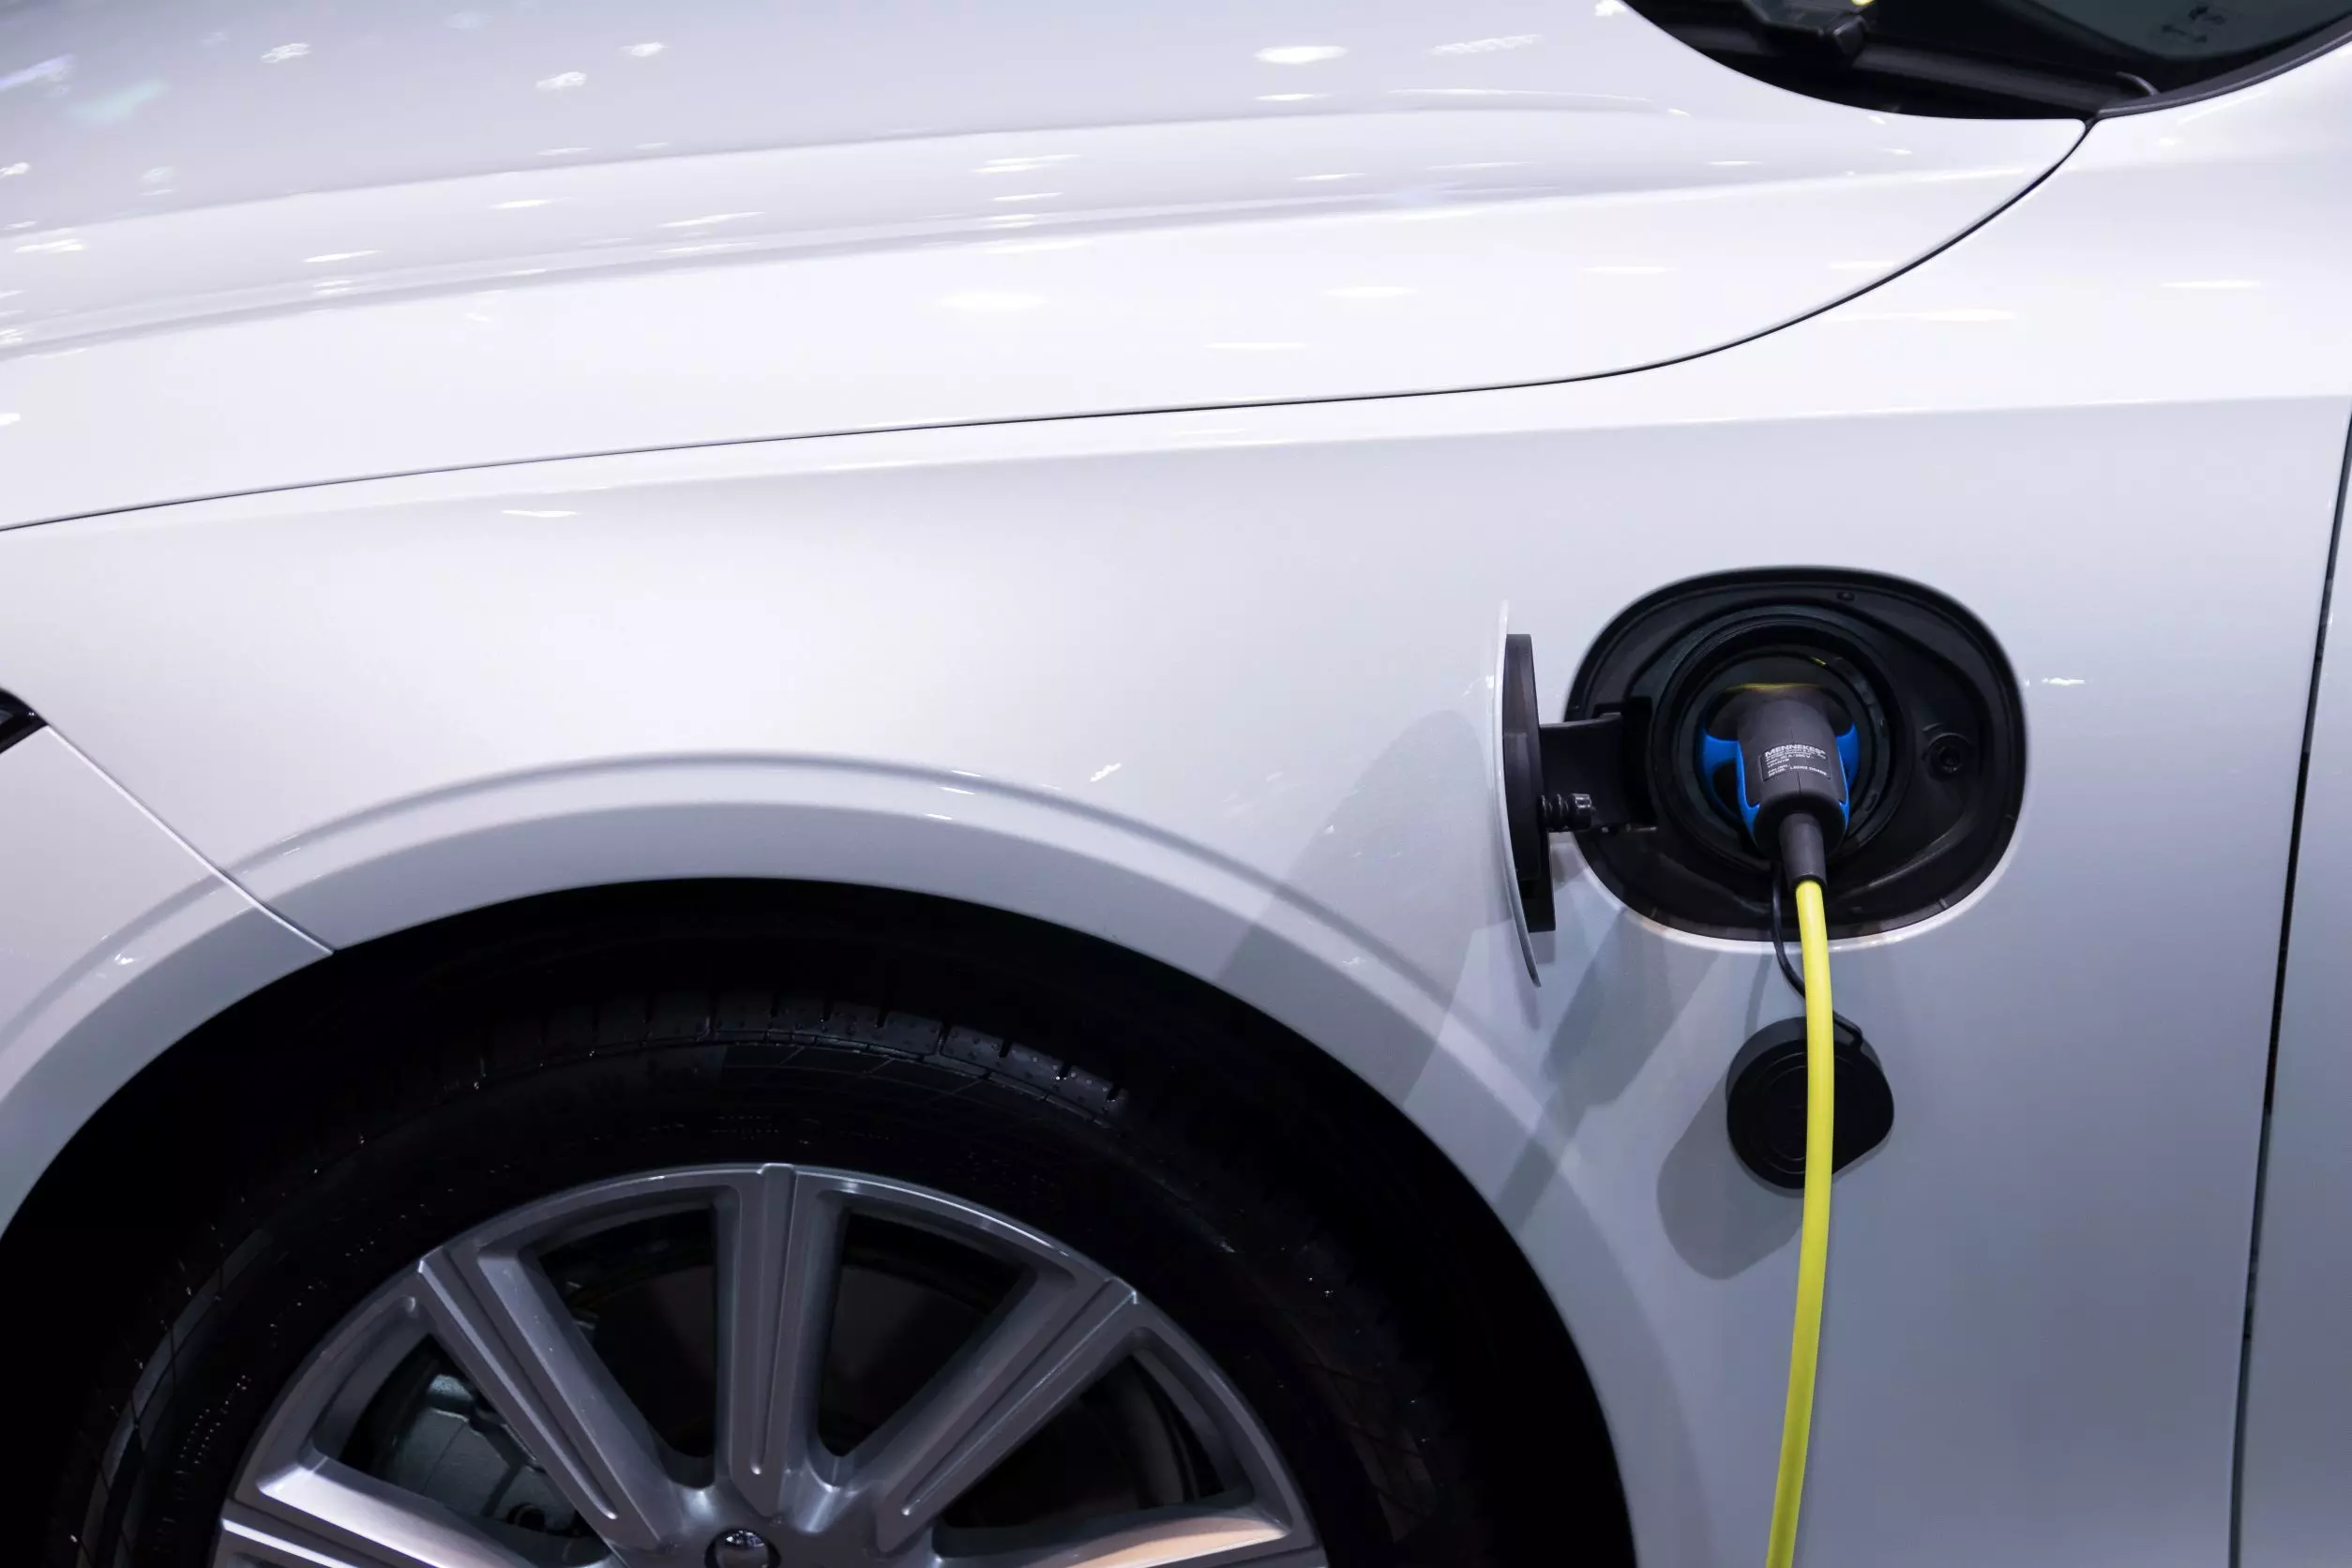 A close-up of an electric vehicle's charging port plugged in to charge.